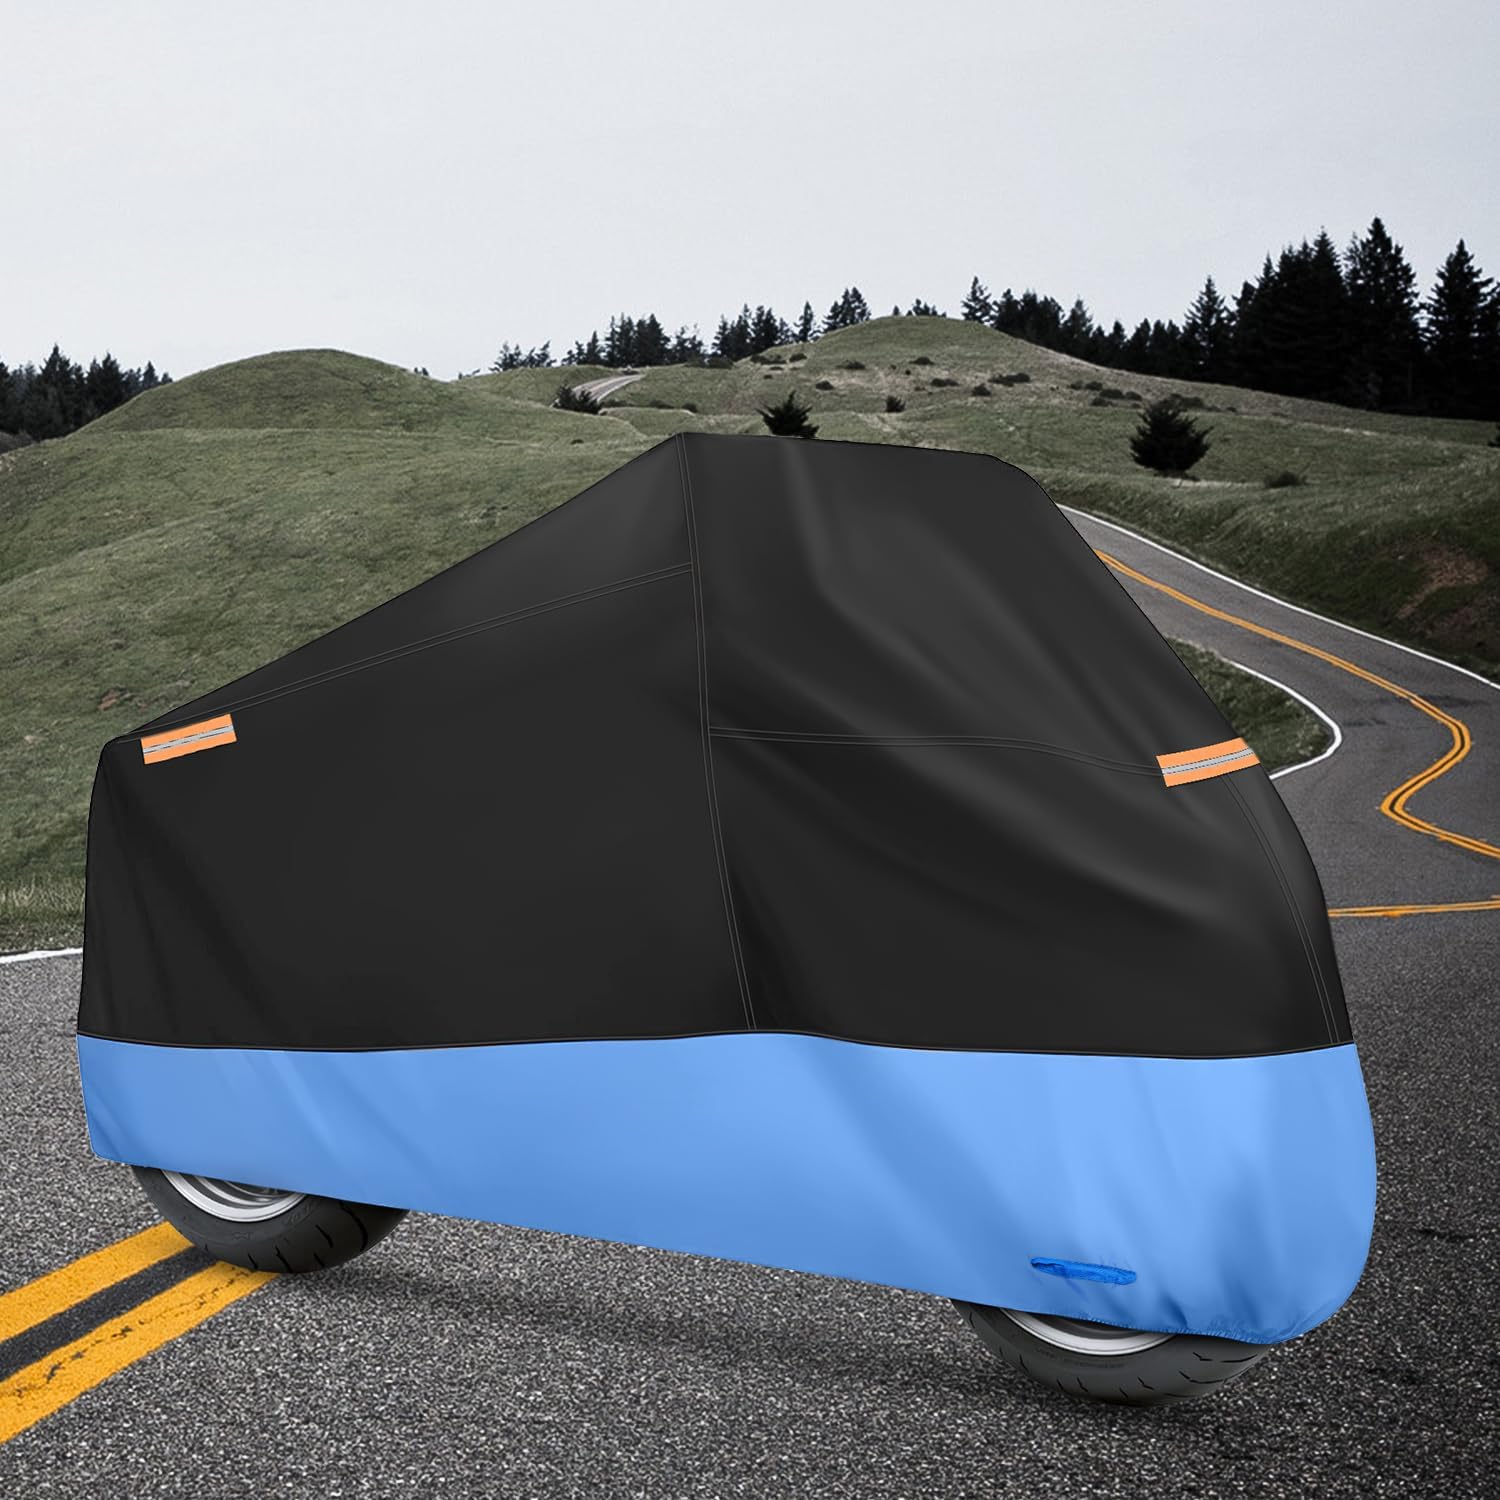 Motorcycle Cover with Lock-Hole Storage Bag & Protective Reflective Strip Fits up to 96" Nilight